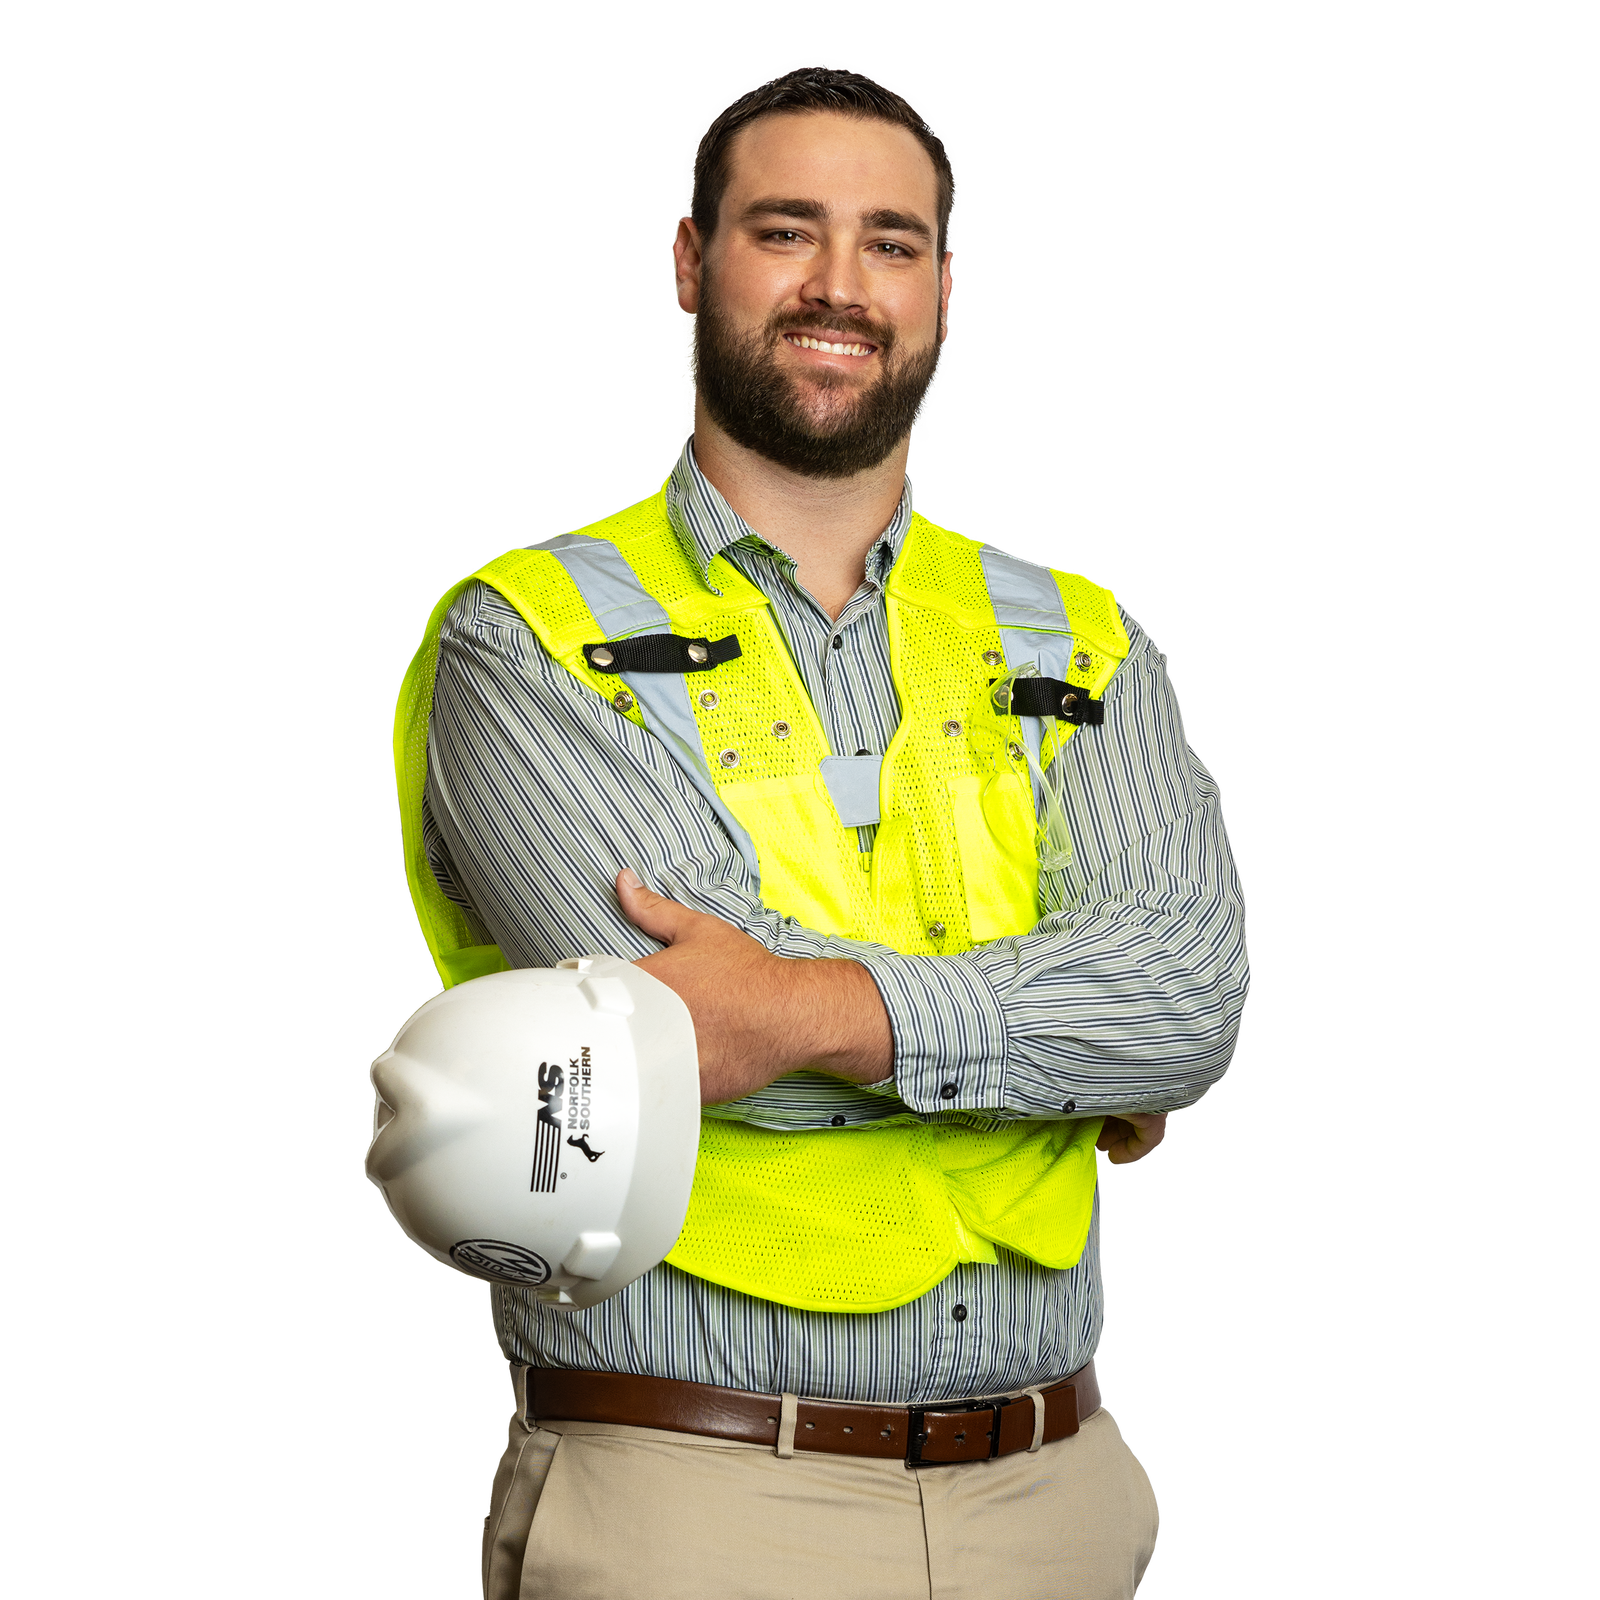 Image of Norfolk Southern a rail transportation company Intermodal manager standing in a safety vest